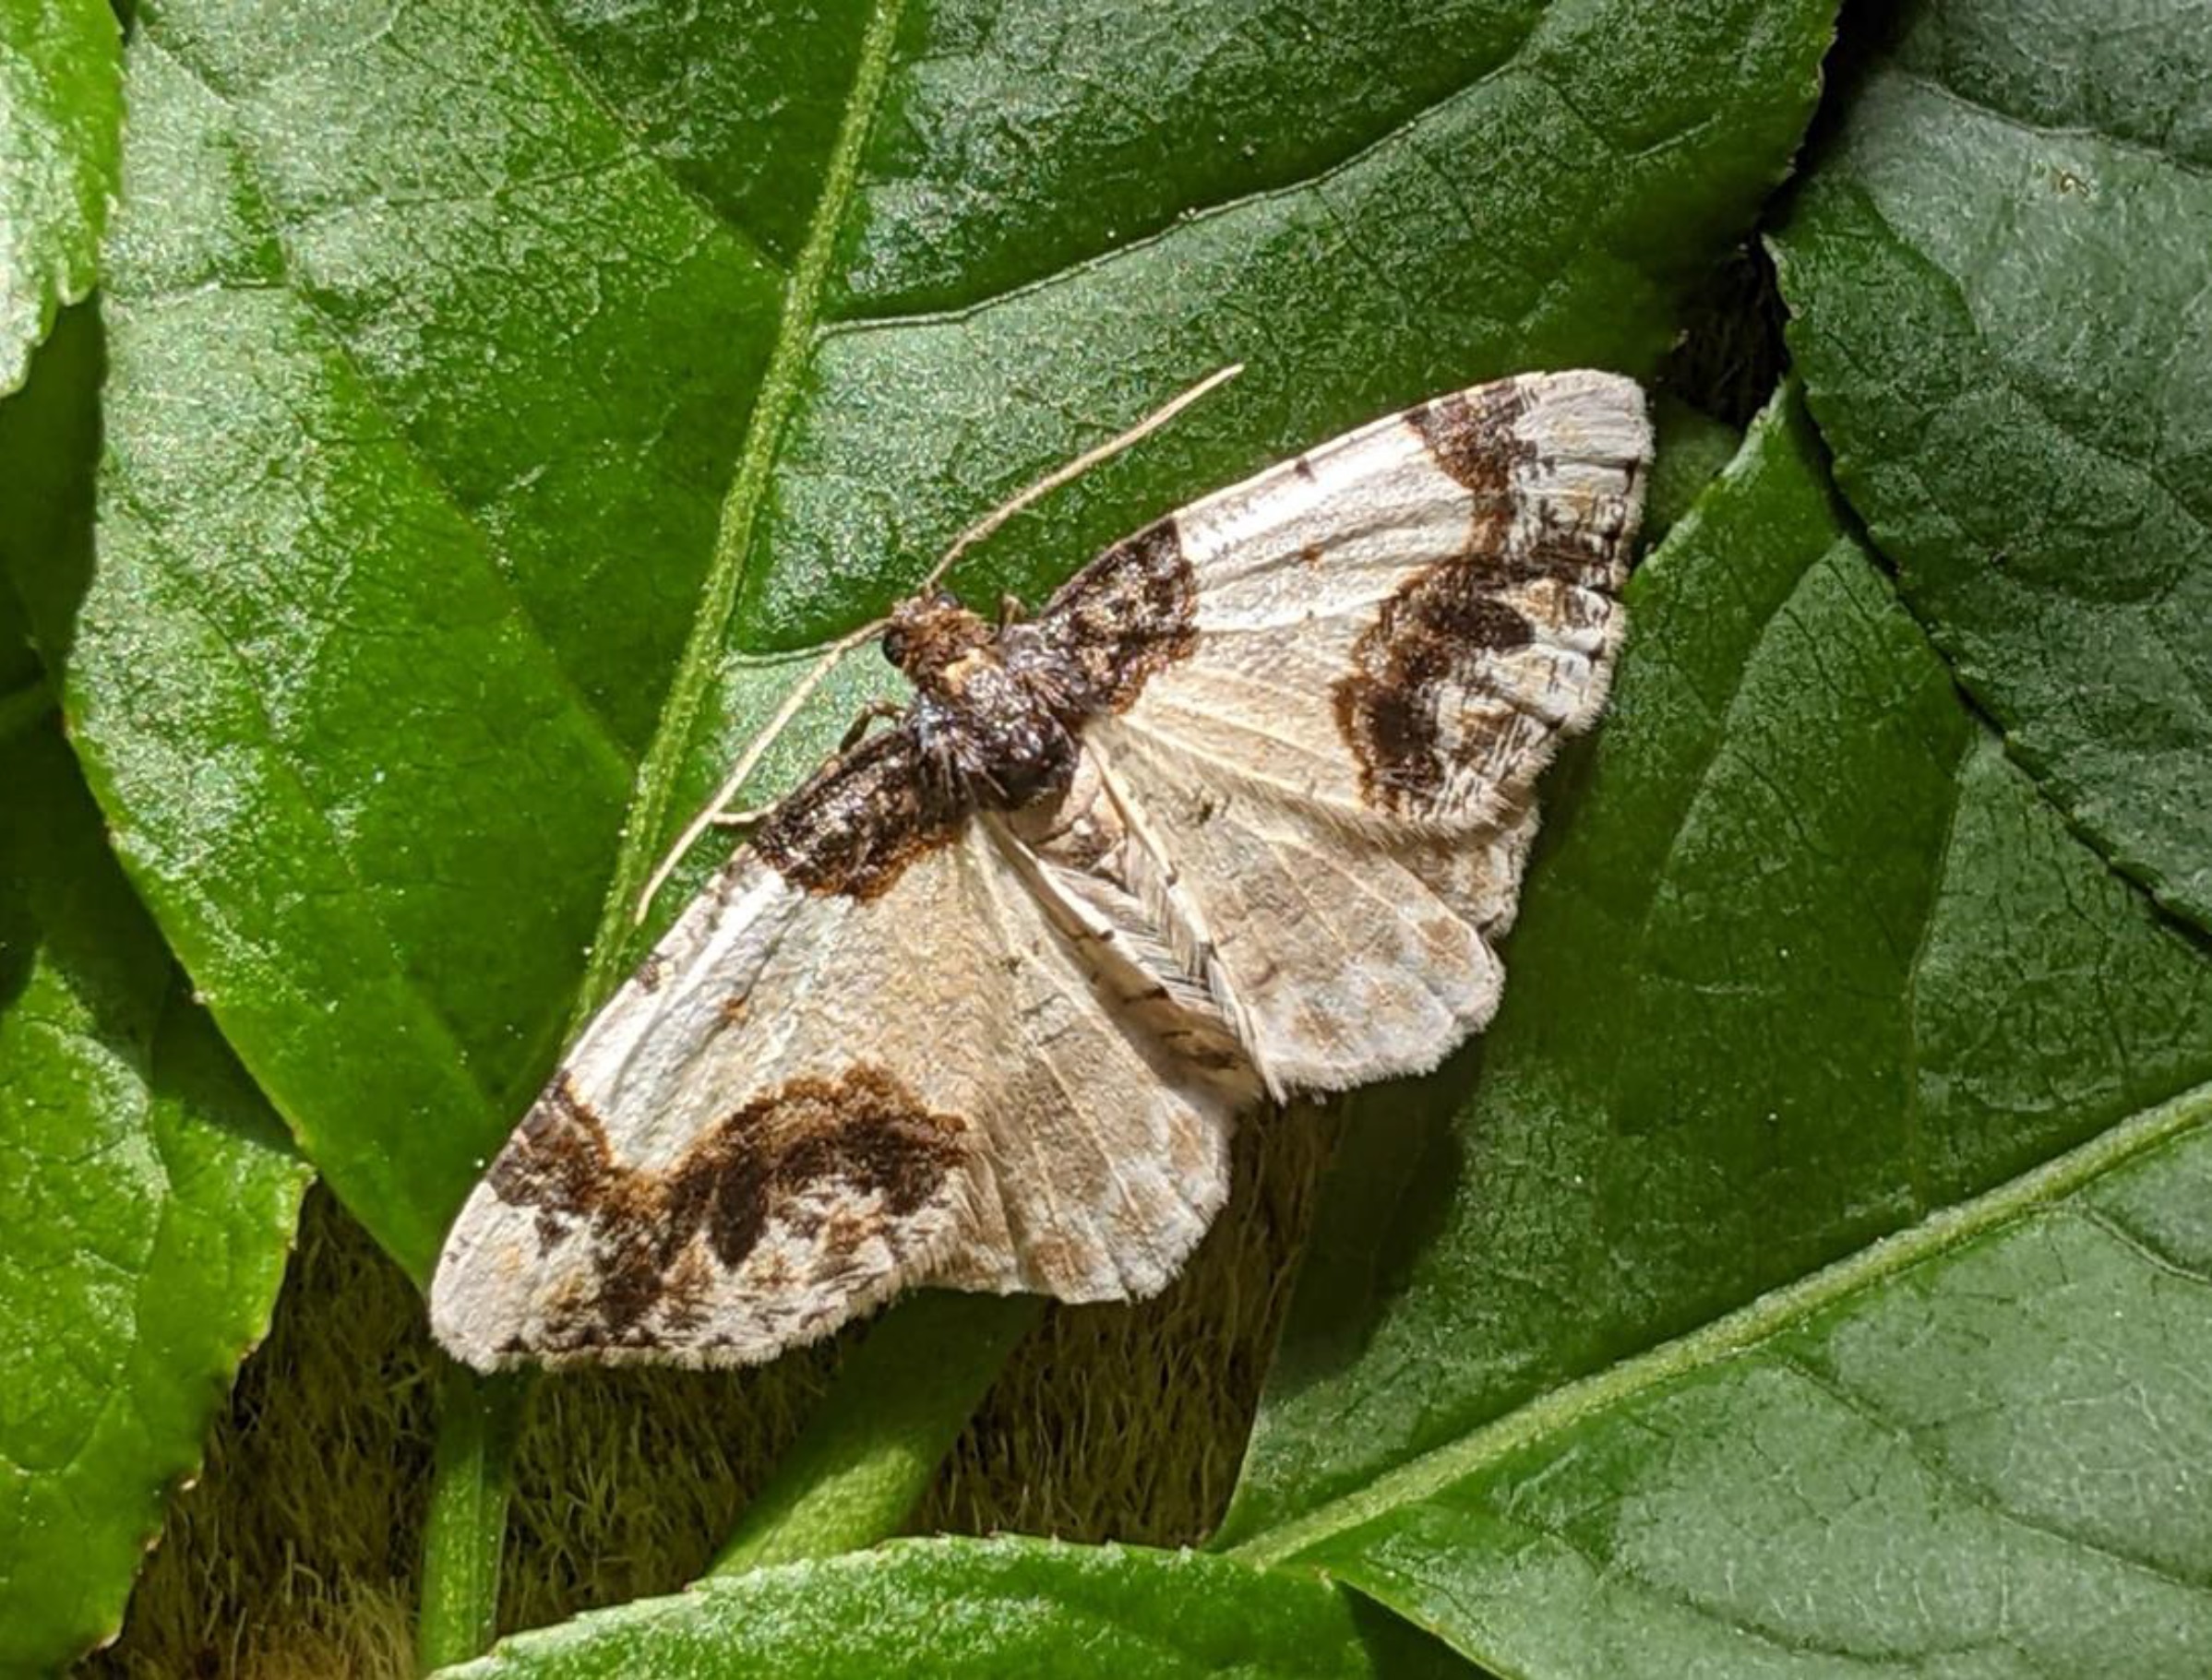 The Scorched Carpet Ligdia Adustata ©Peter Norman